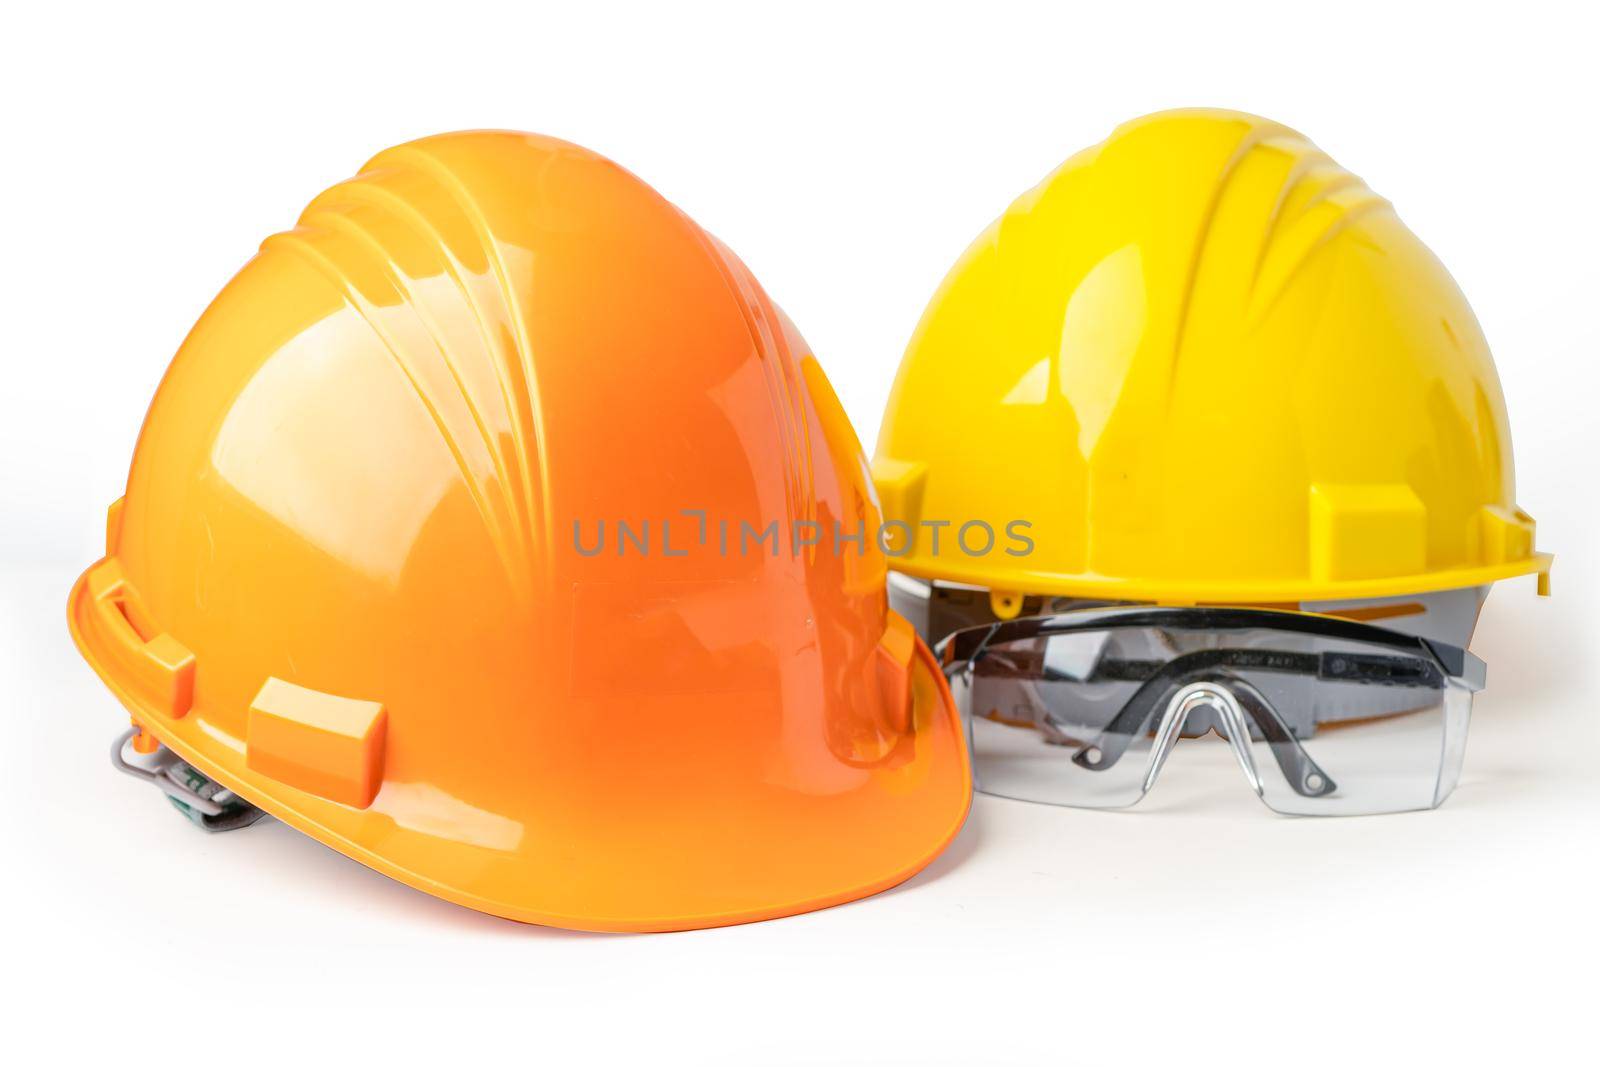 Yellow and orange construction helmet, safety glasses and magnifying glass isolated on white background with clipping path, engineer concept.